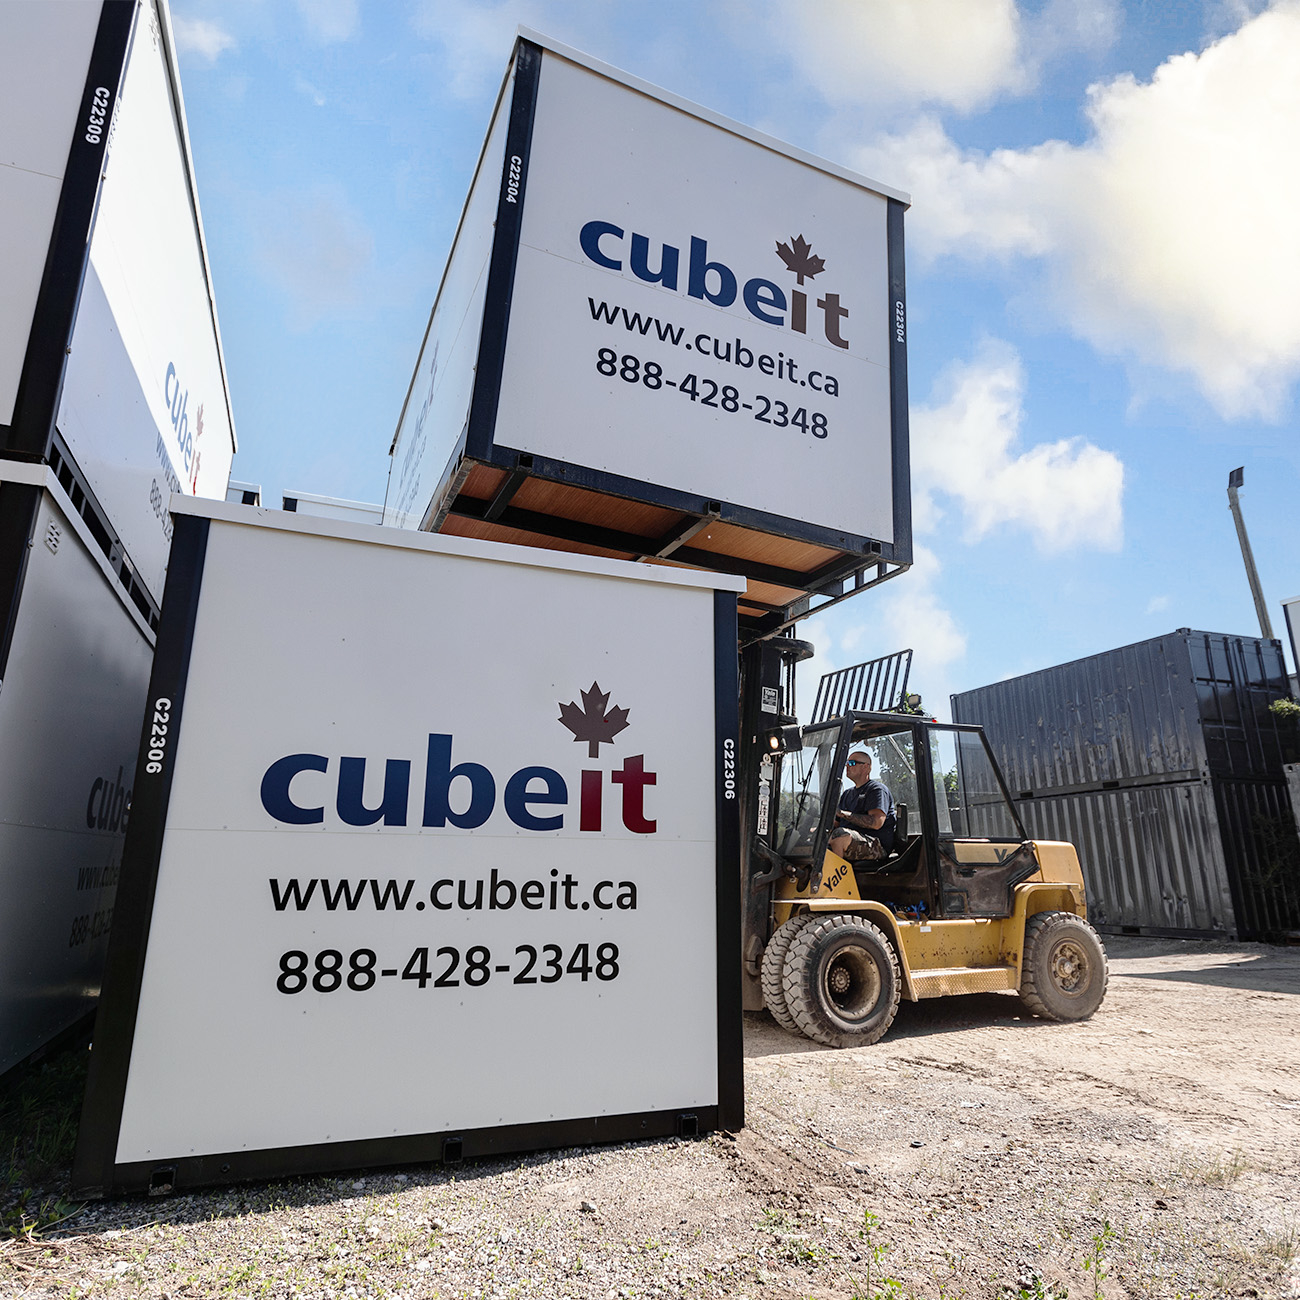 Cubeit Portable Storage - Montreal - Moving Services & Storage Facilities